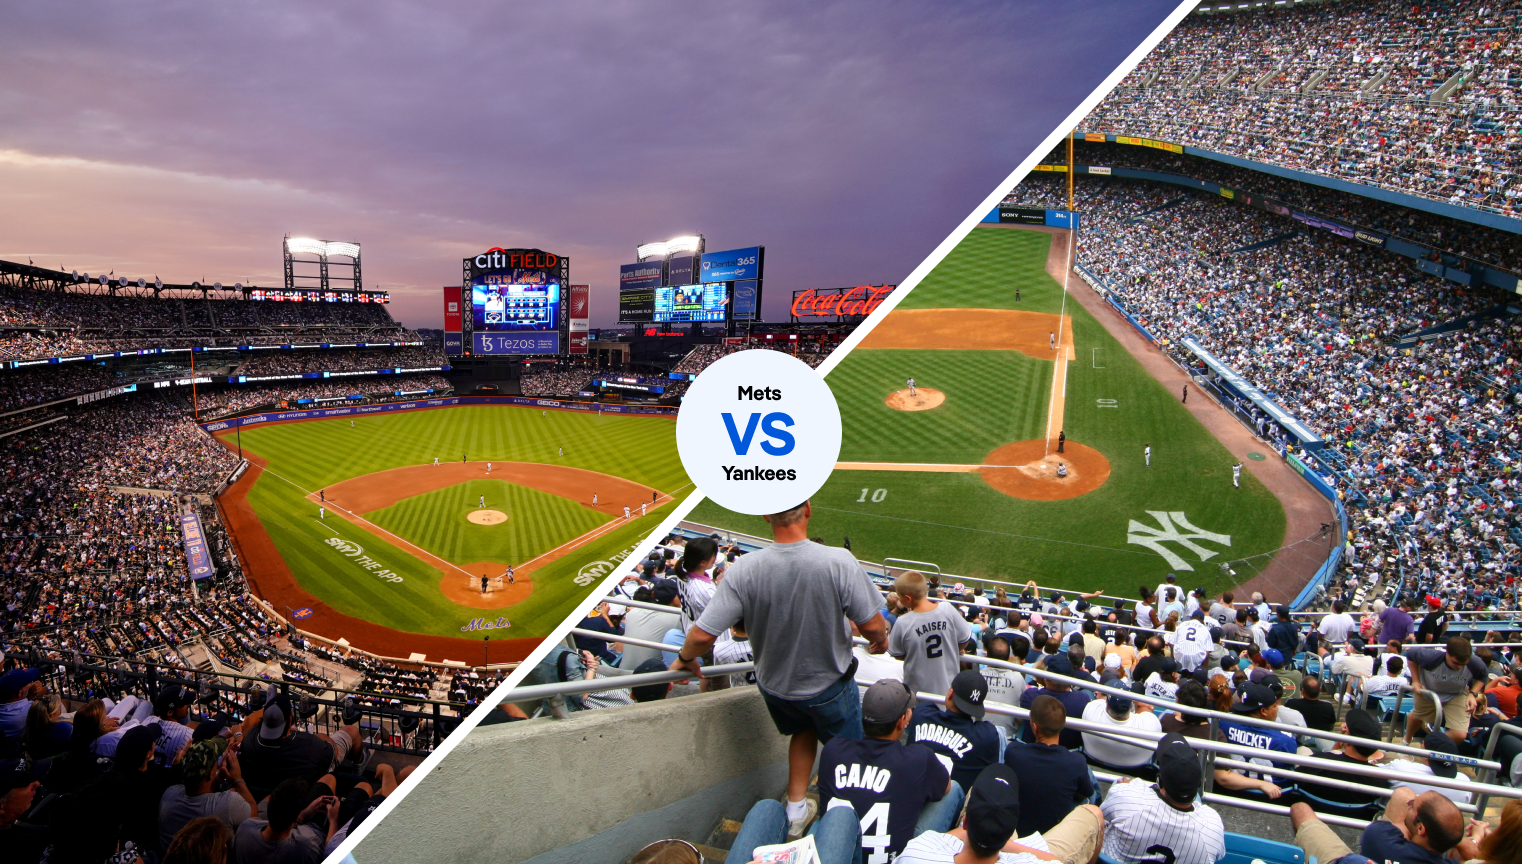 Should you go to a Yankees or Mets game?